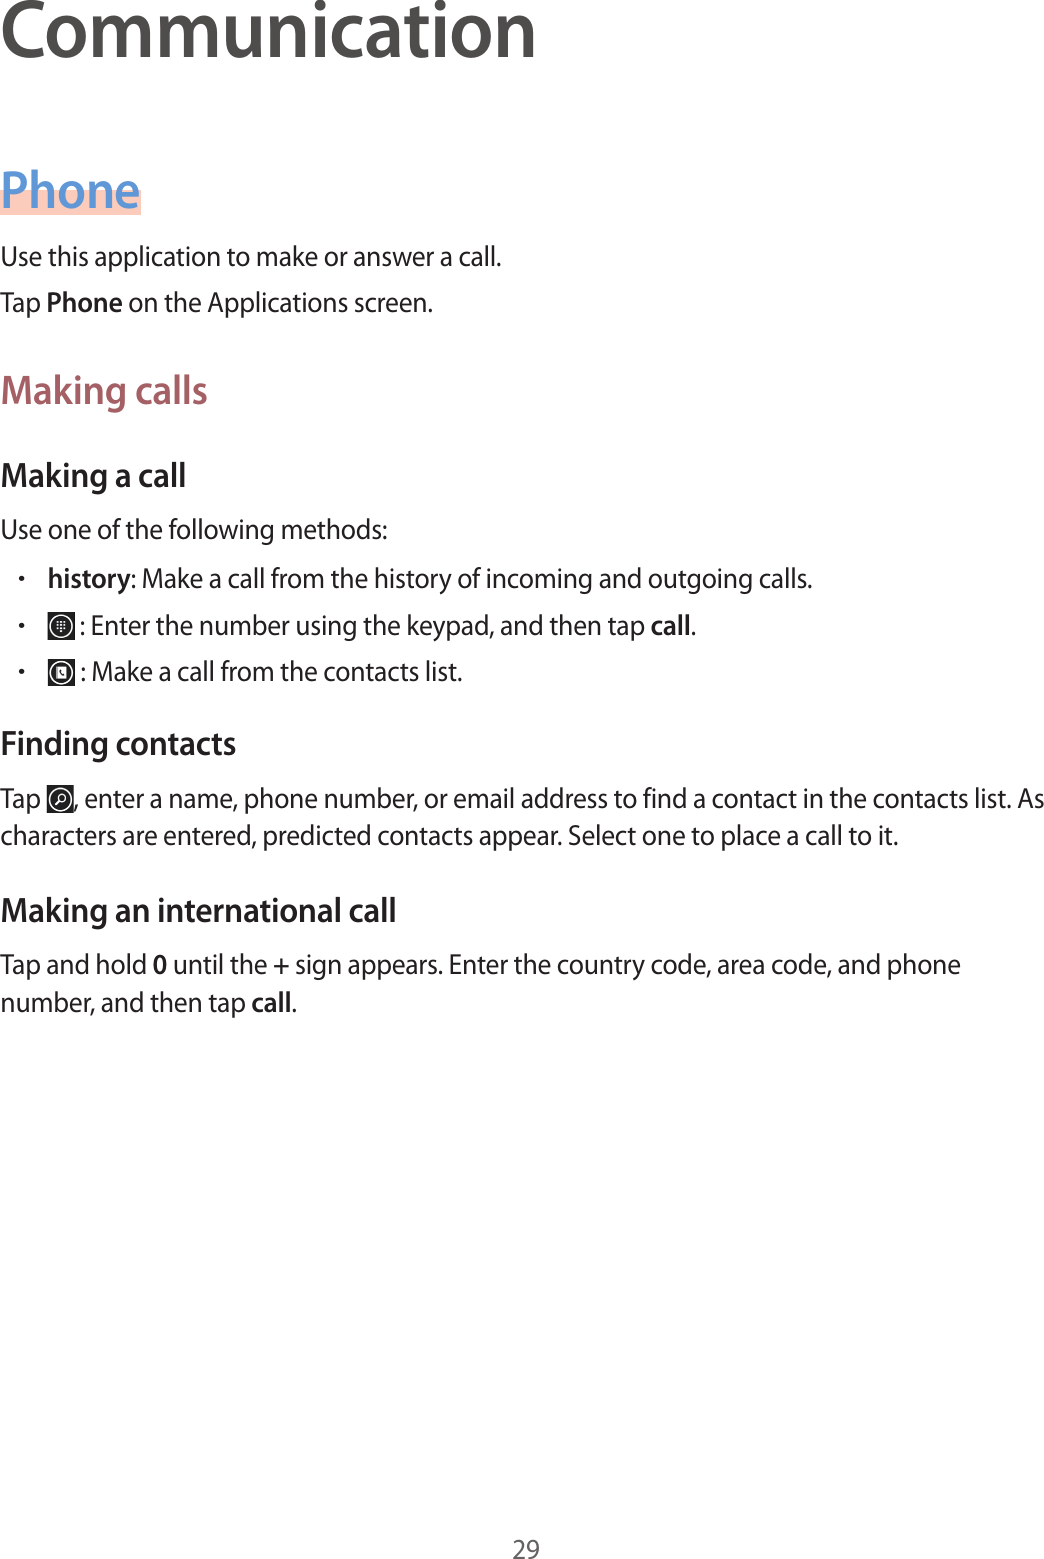 29CommunicationPhoneUse this application to make or answer a call.Tap Phone on the Applications screen.Making callsMaking a callUse one of the following methods:• history: Make a call from the history of incoming and outgoing calls.•  : Enter the number using the keypad, and then tap call.•  : Make a call from the contacts list.Finding contactsTap  , enter a name, phone number, or email address to find a contact in the contacts list. As characters are entered, predicted contacts appear. Select one to place a call to it.Making an international callTap and hold 0 until the + sign appears. Enter the country code, area code, and phone number, and then tap call.